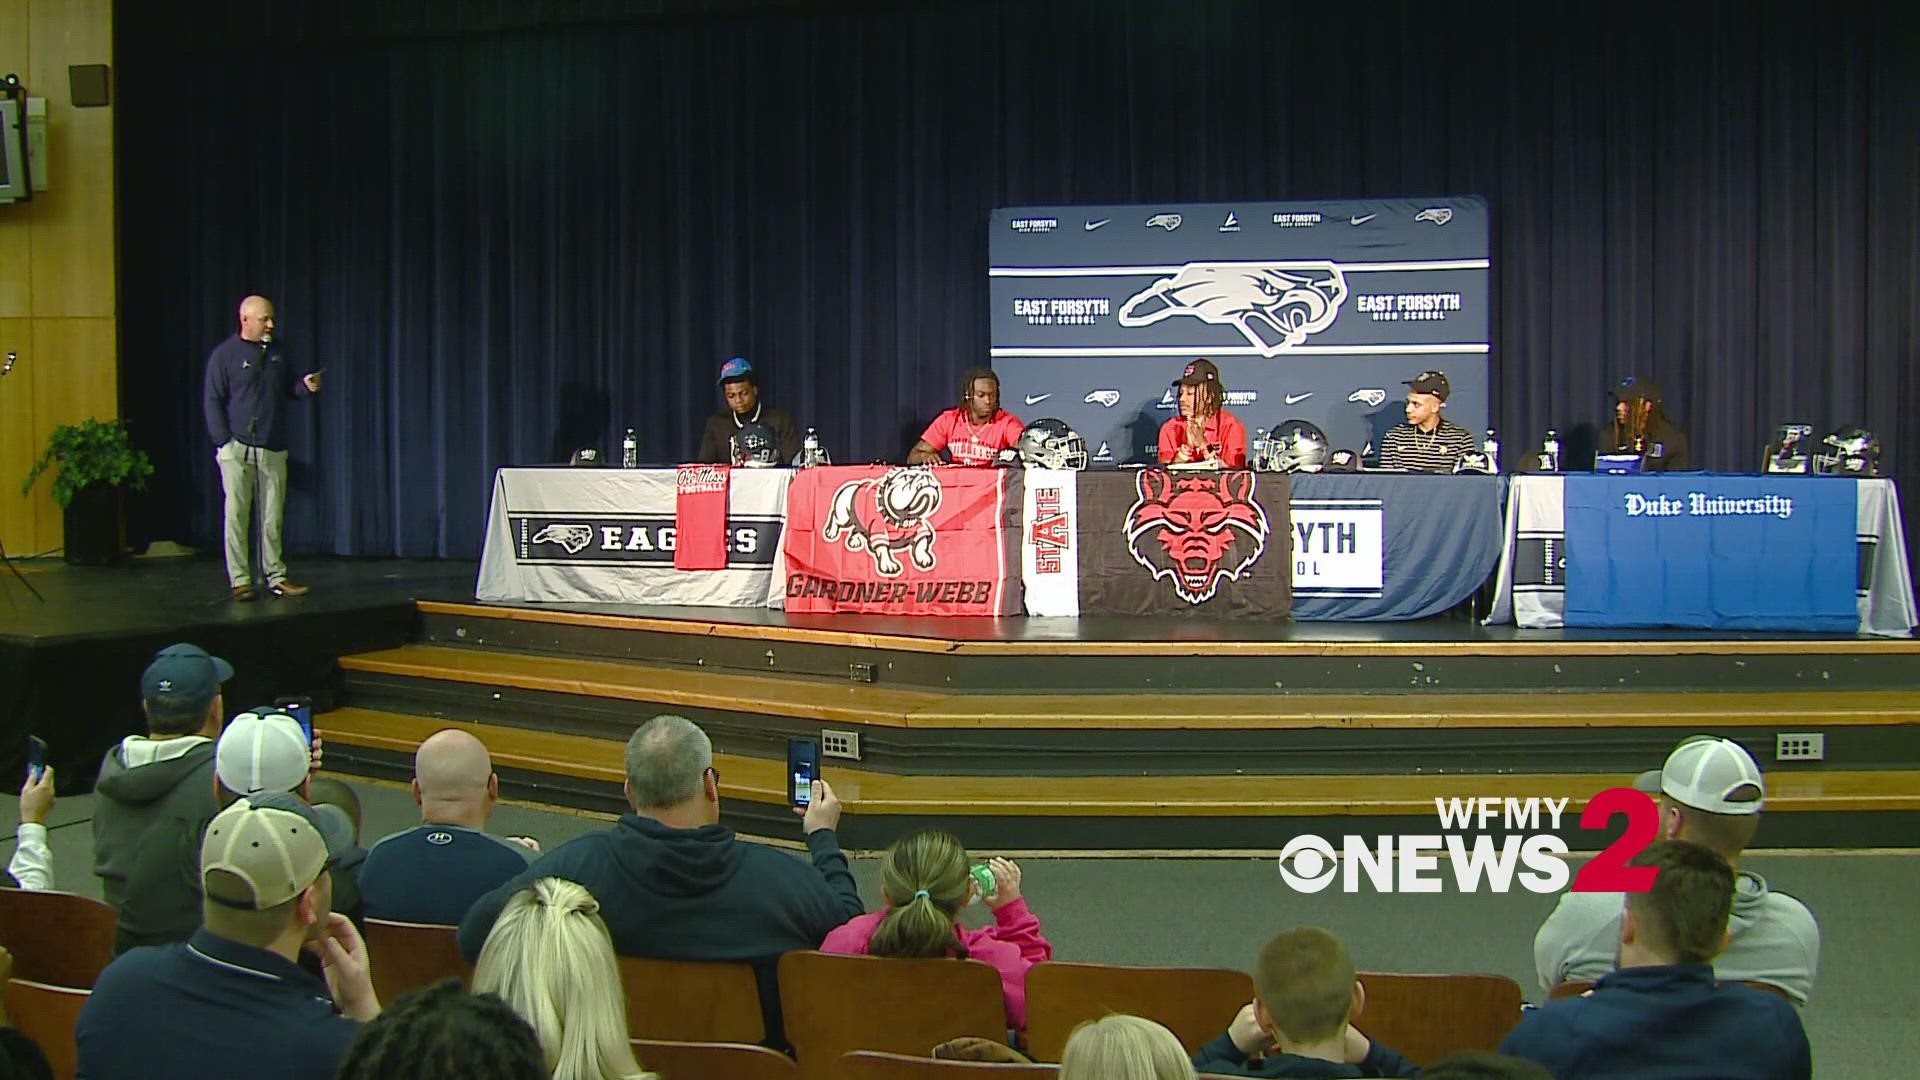 Five players signed today and are headed to Ole Miss, Gardner-Webb, Arkansas State, Army & Duke